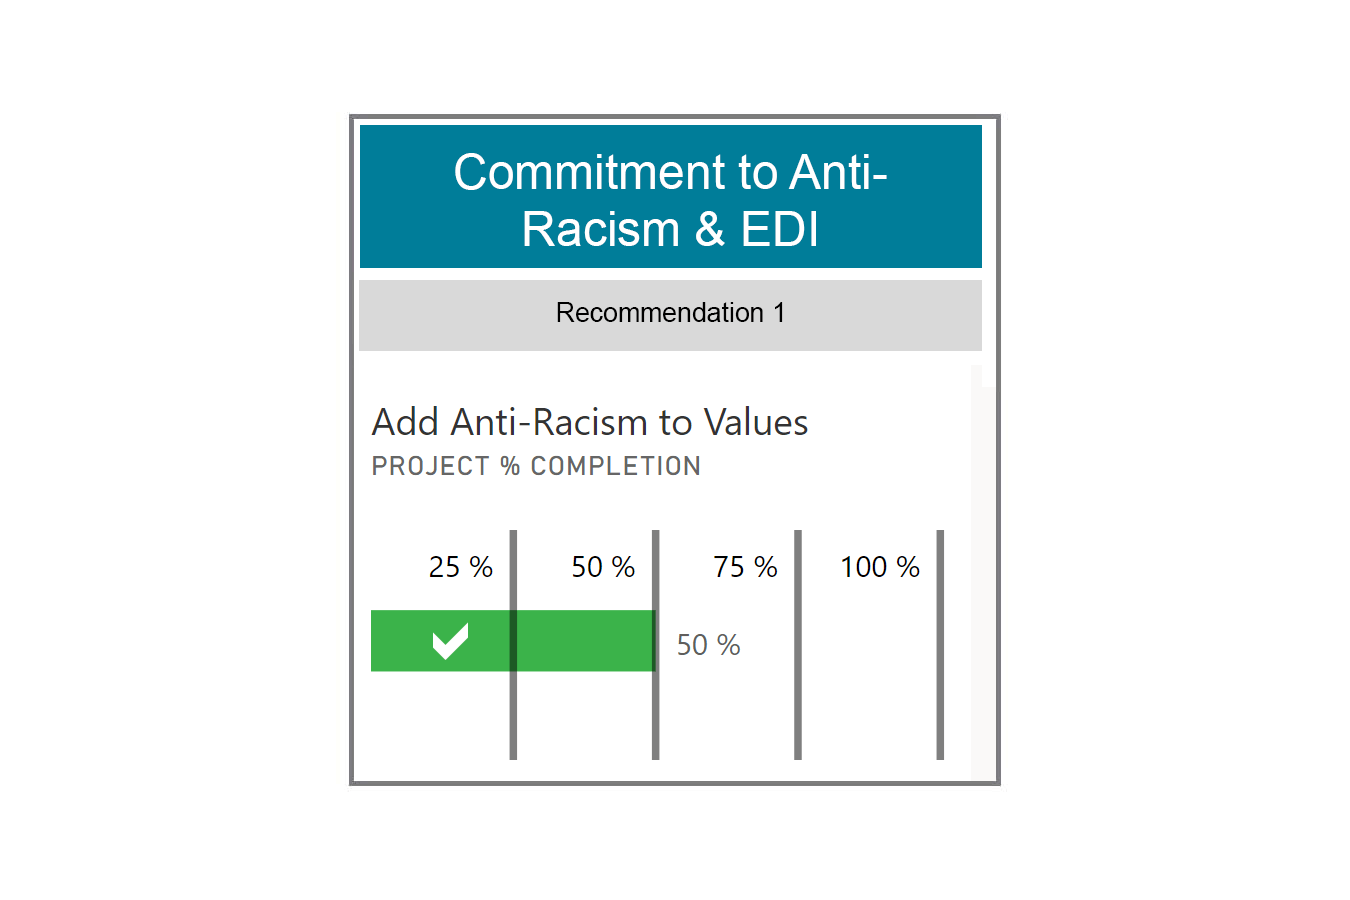 Commitment to Anti-Racism and EDI recommendation 1 graphic